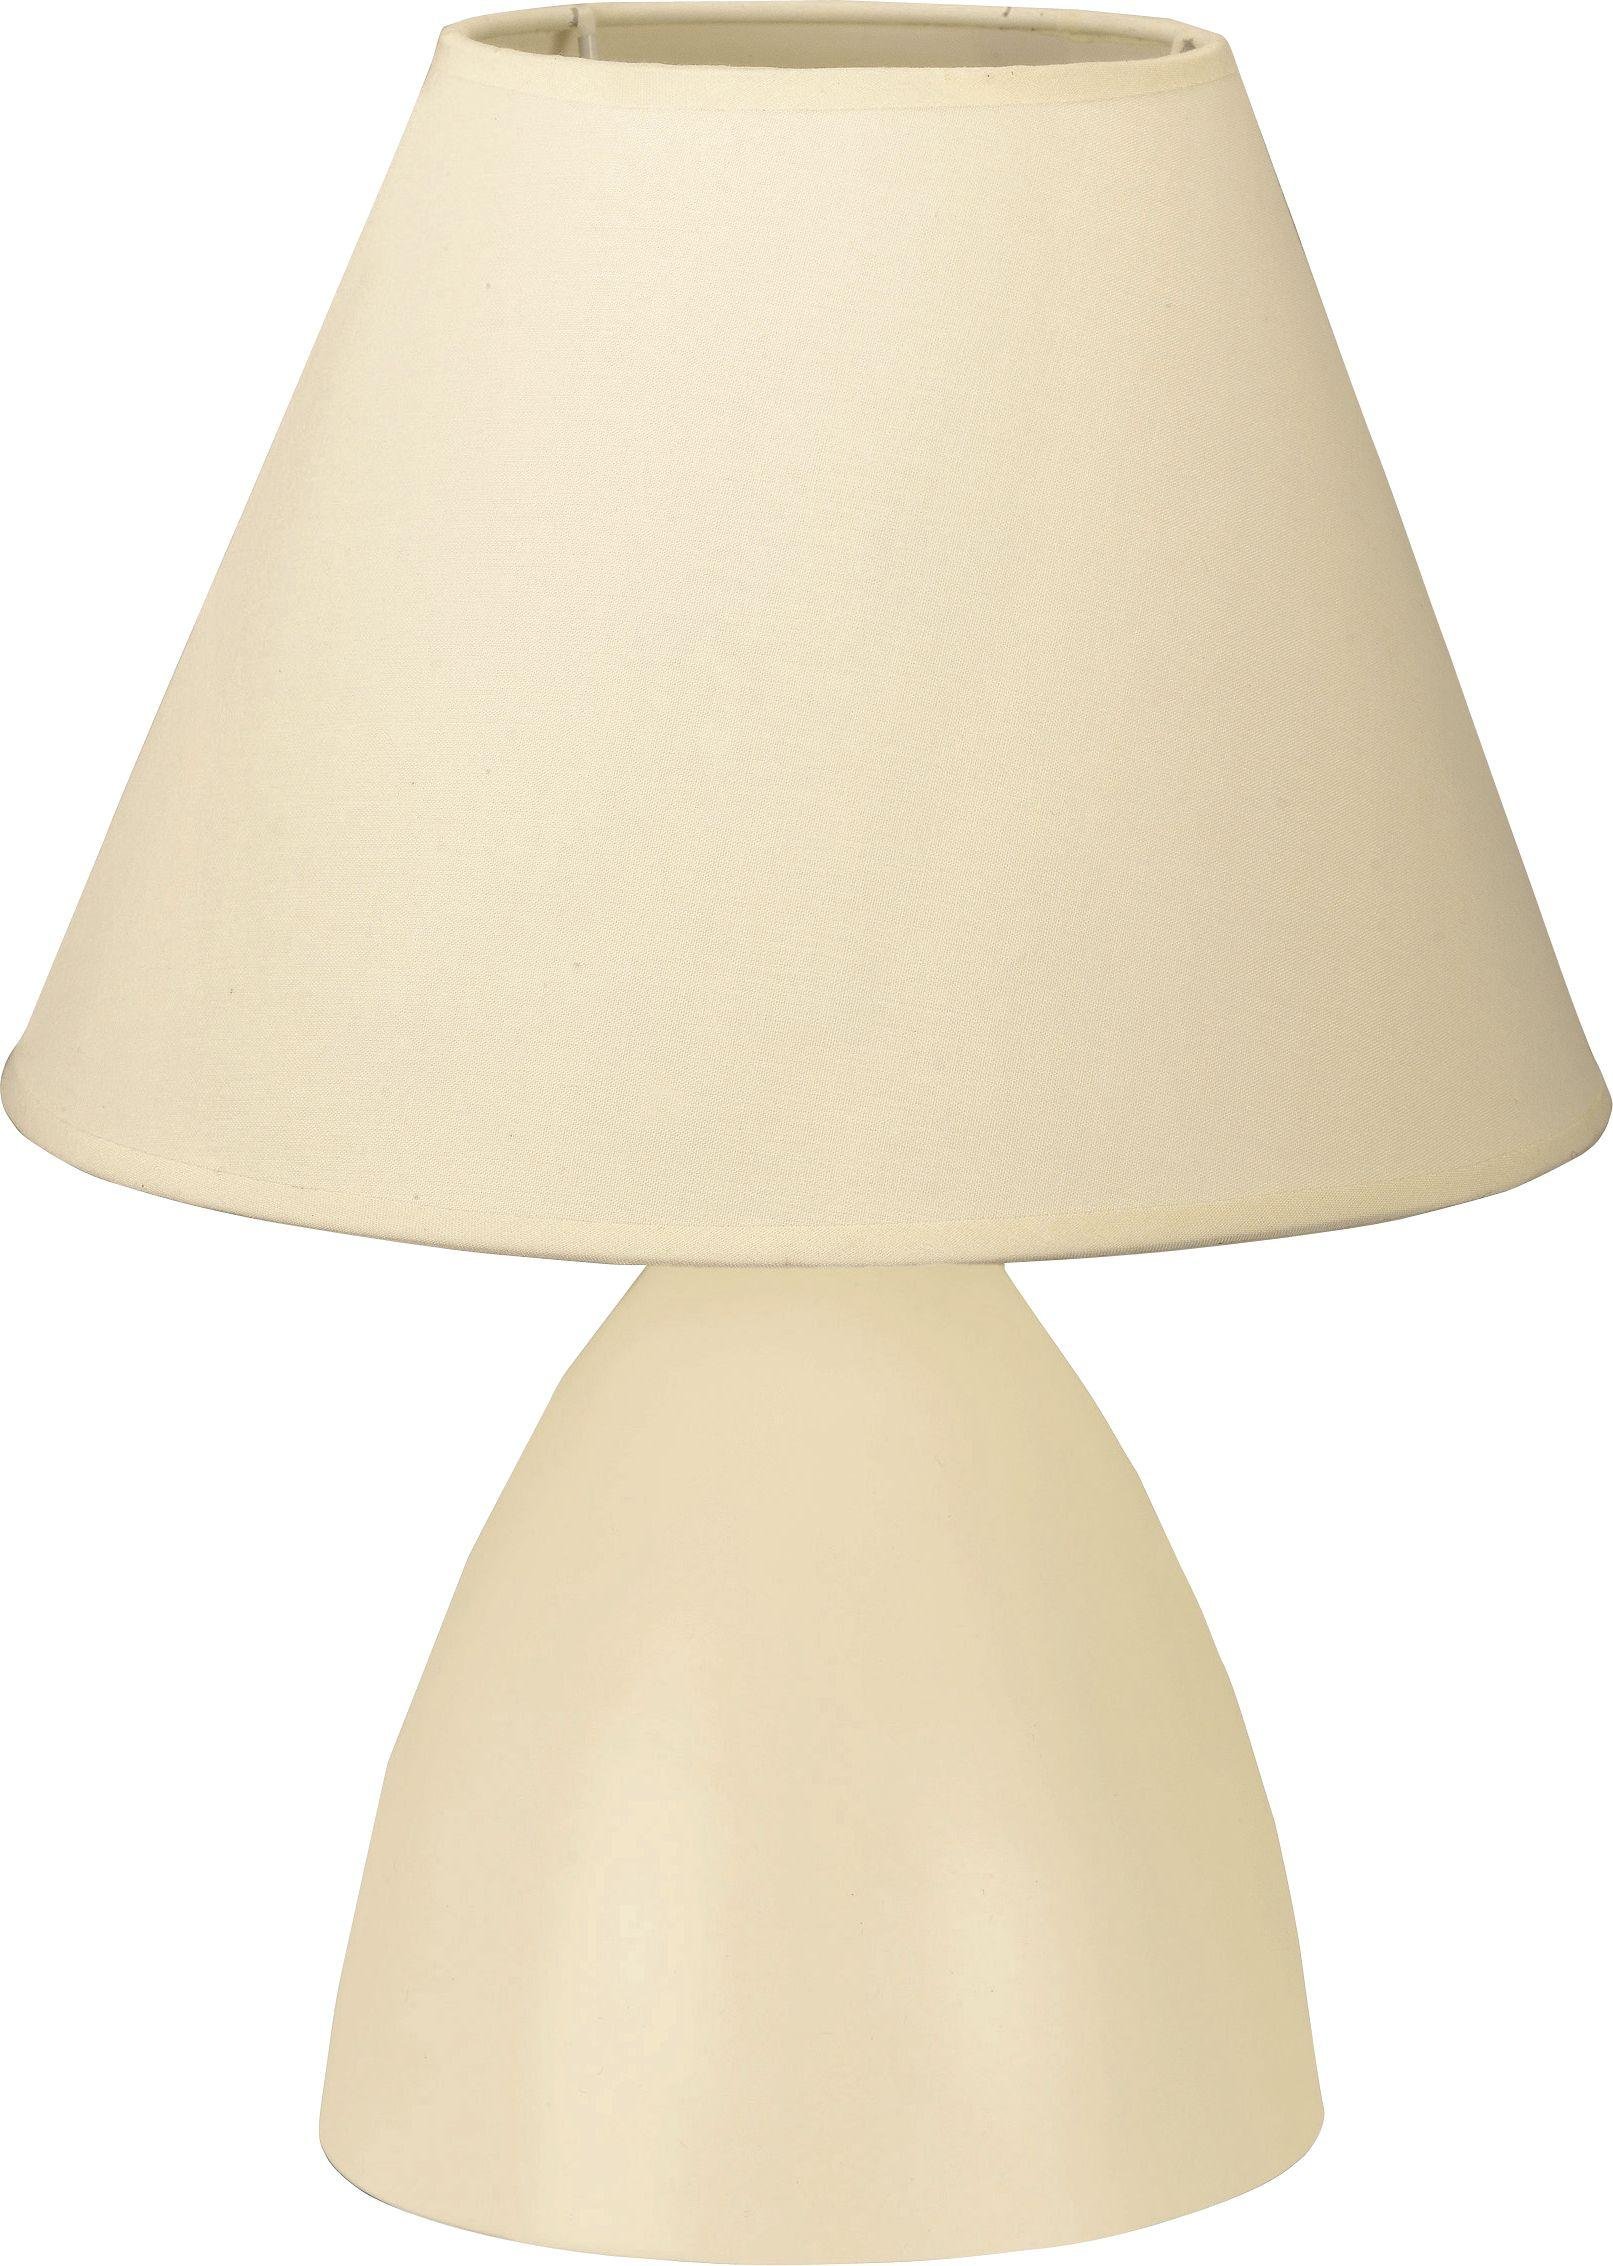 Argos Home Tenby Touch Table Lamp - Cream